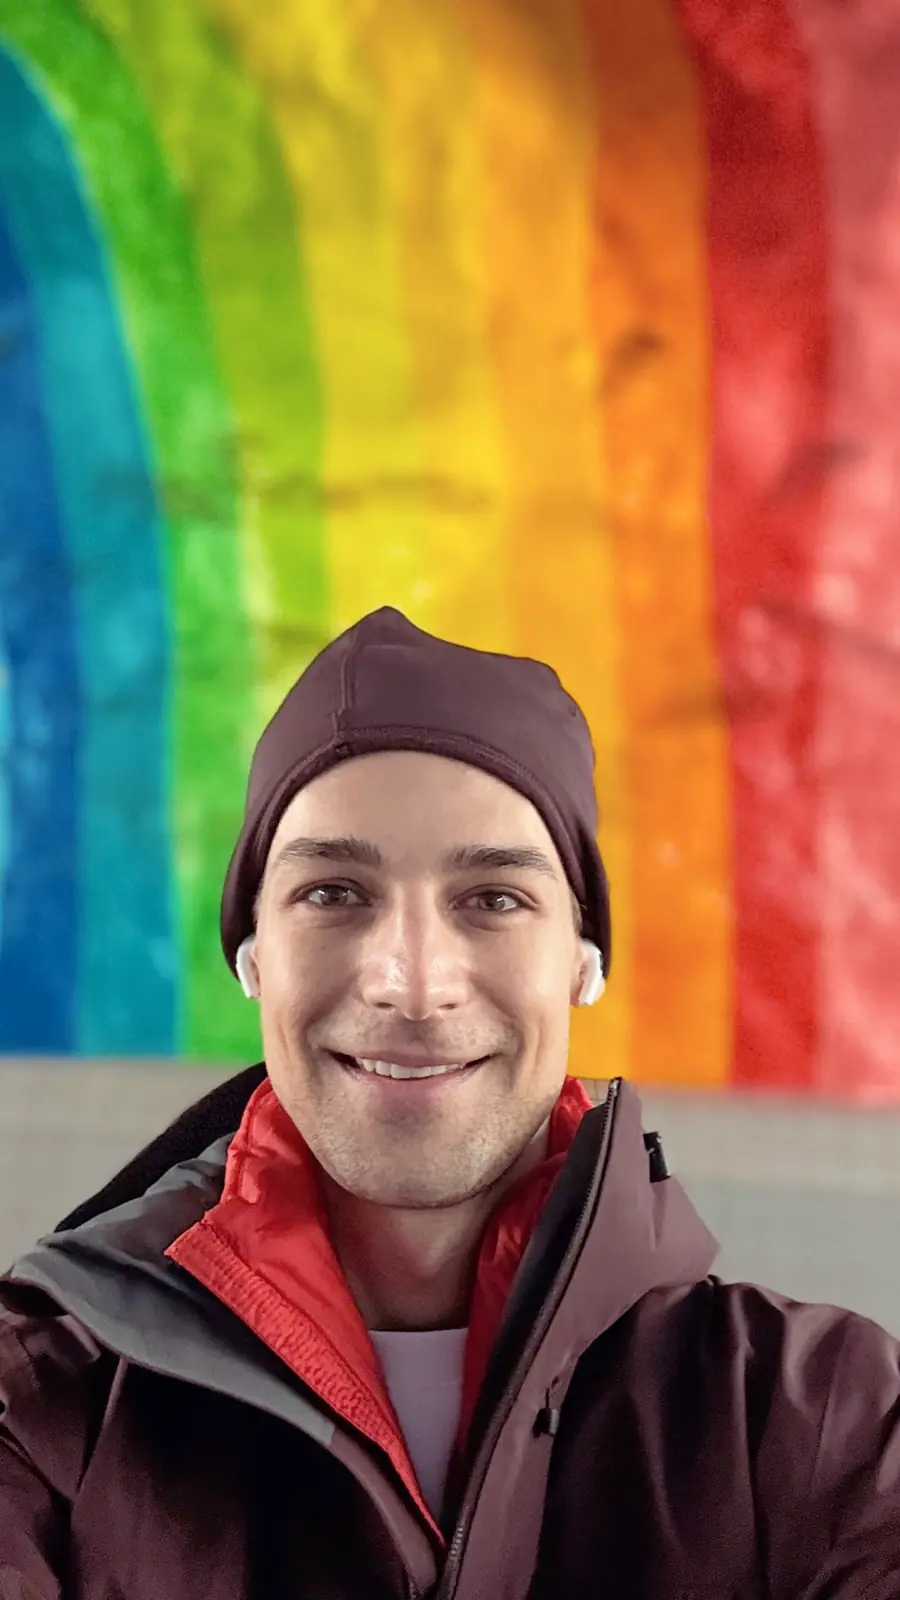 Jeremiah wearing winter hat and coat with rainbow mural behind him